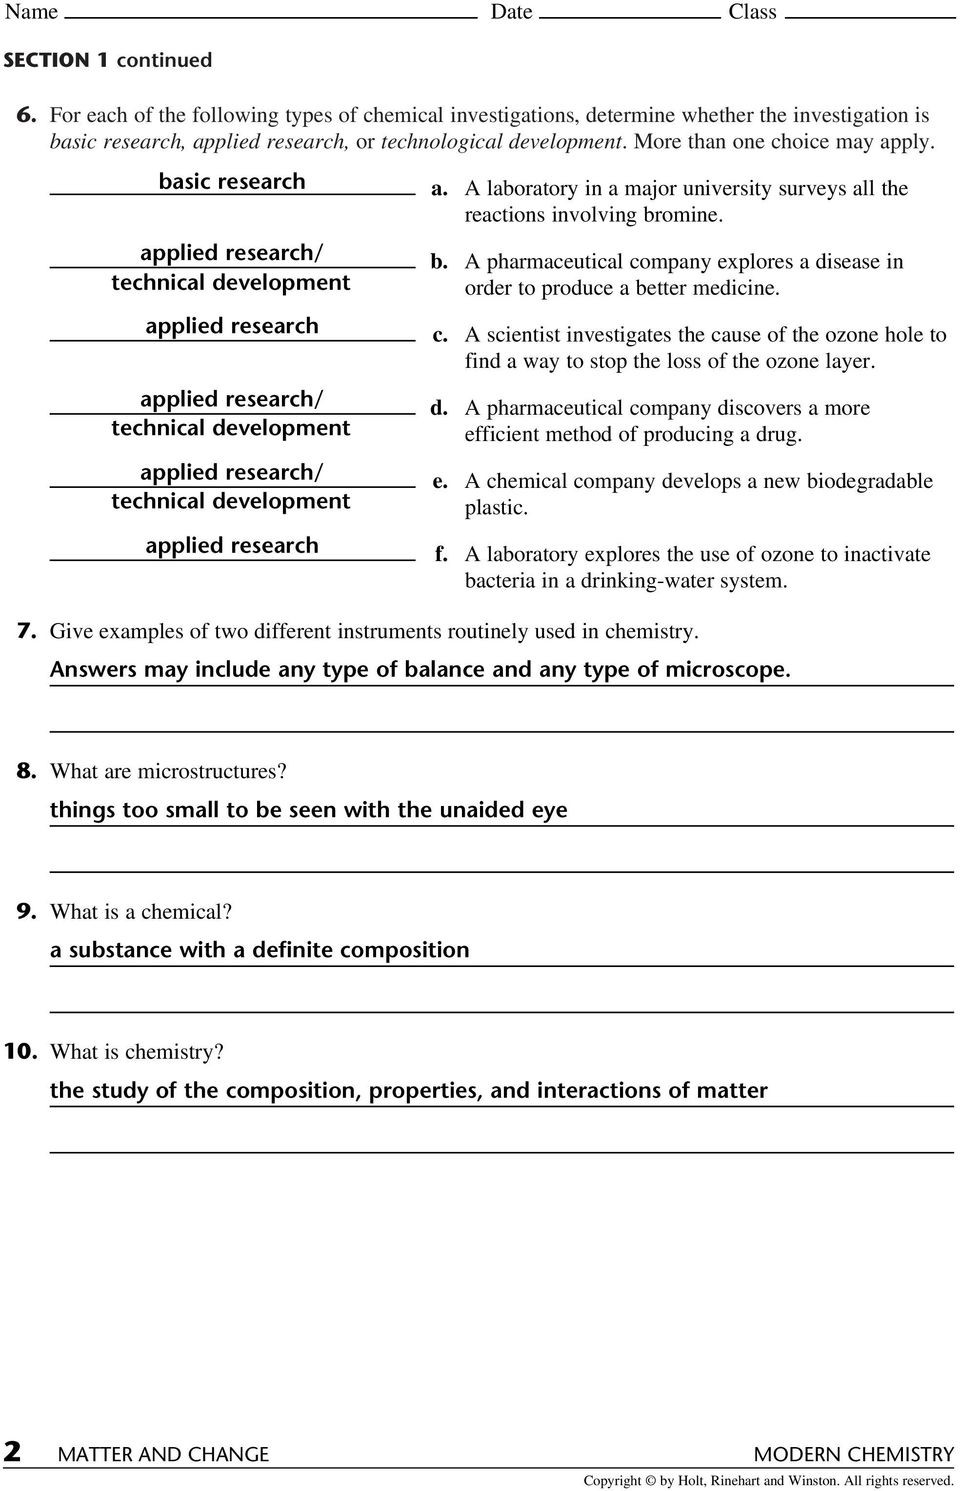 Chemistry Worksheet Matter 1 Answers Name Date Class Chapter 1 Review Answer the Following